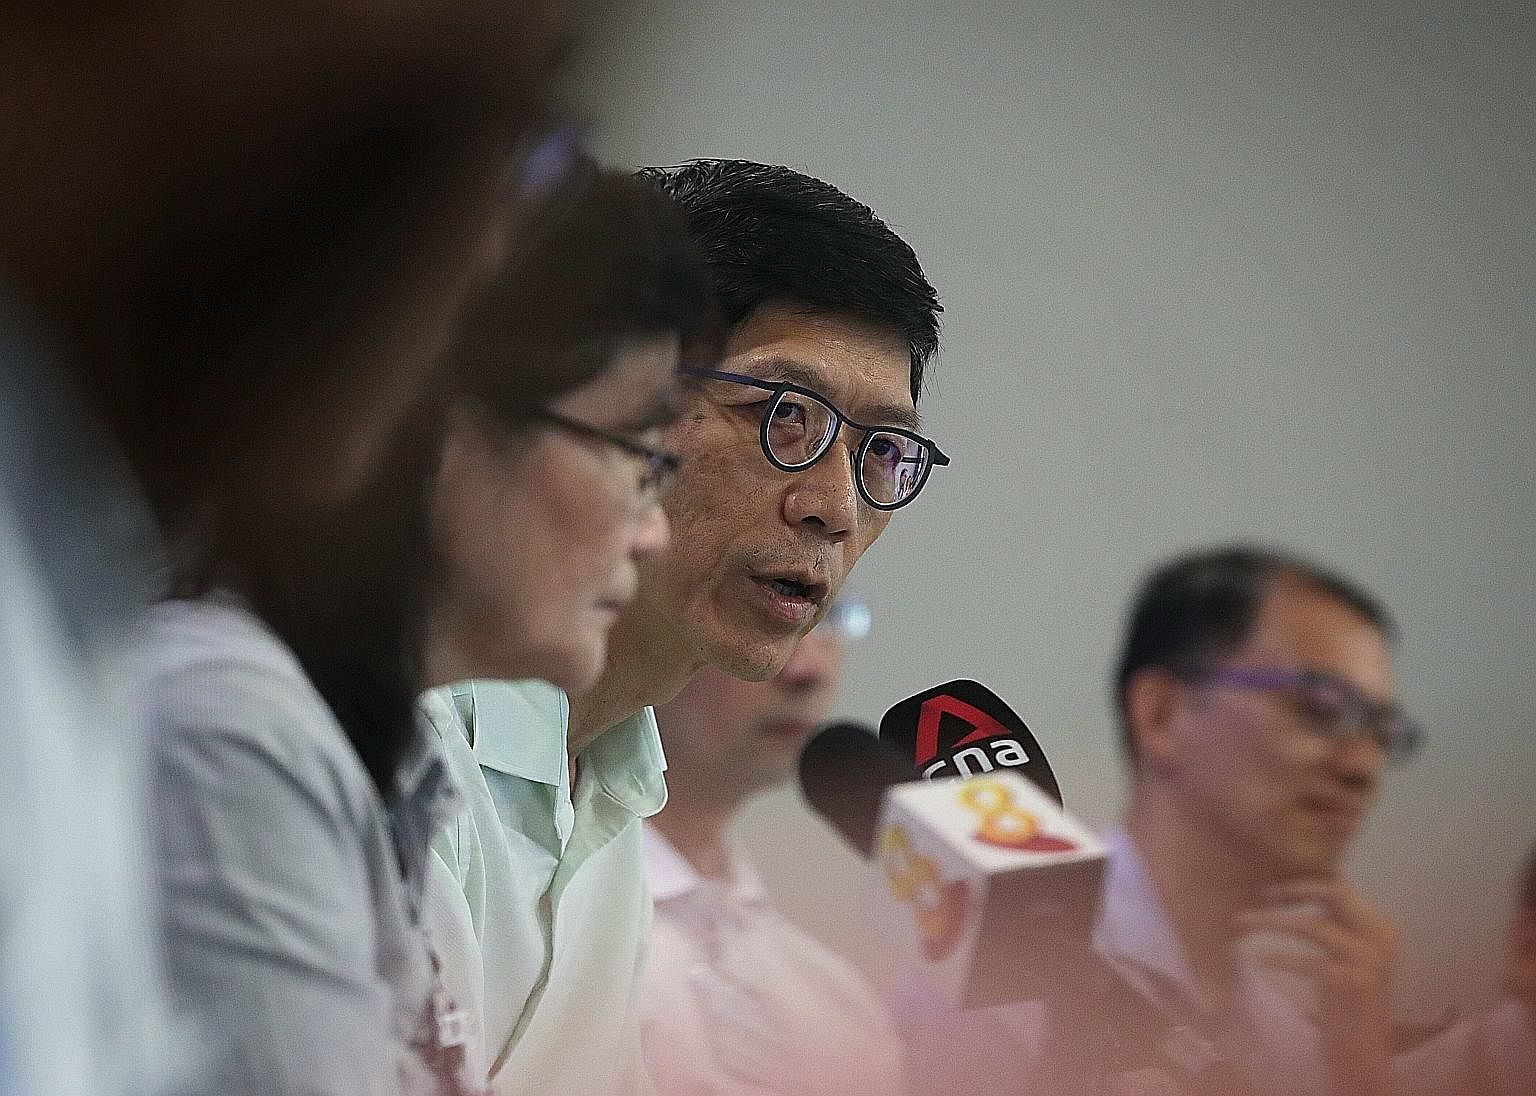 The measures taken here are based on experience and data from previous viral outbreaks which have been effective, says Professor Tan Chorh Chuan, chief health scientist at the Ministry of Health.